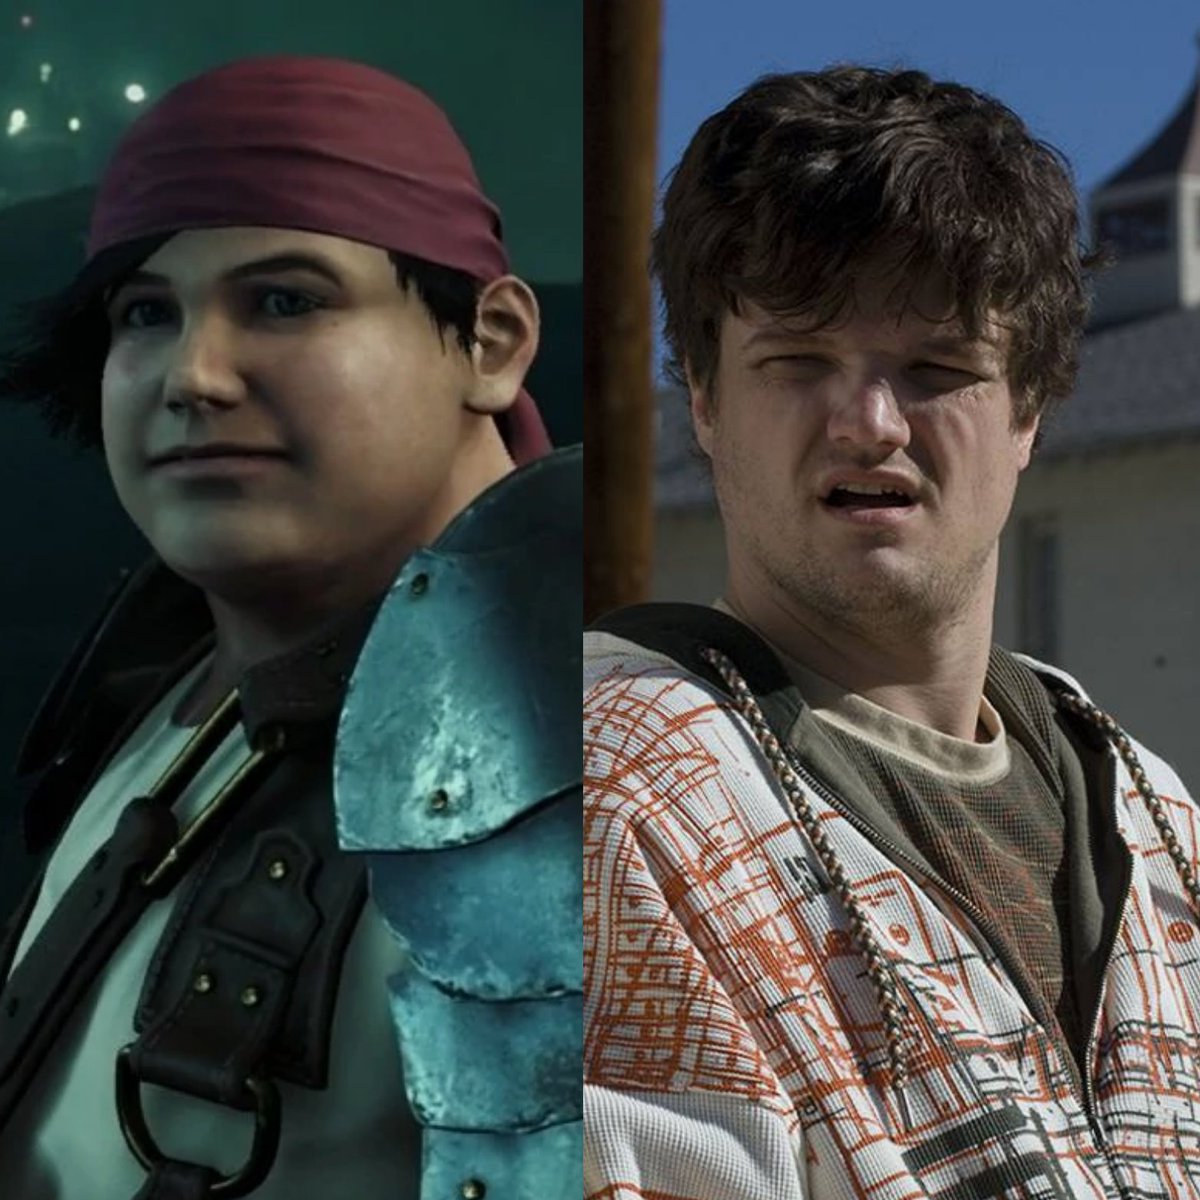 If you've been trying to figure it out: the voice of Wedge in Final Fantasy 7 Remake is Breaking Bad star, Matt L. Jones (Badger).